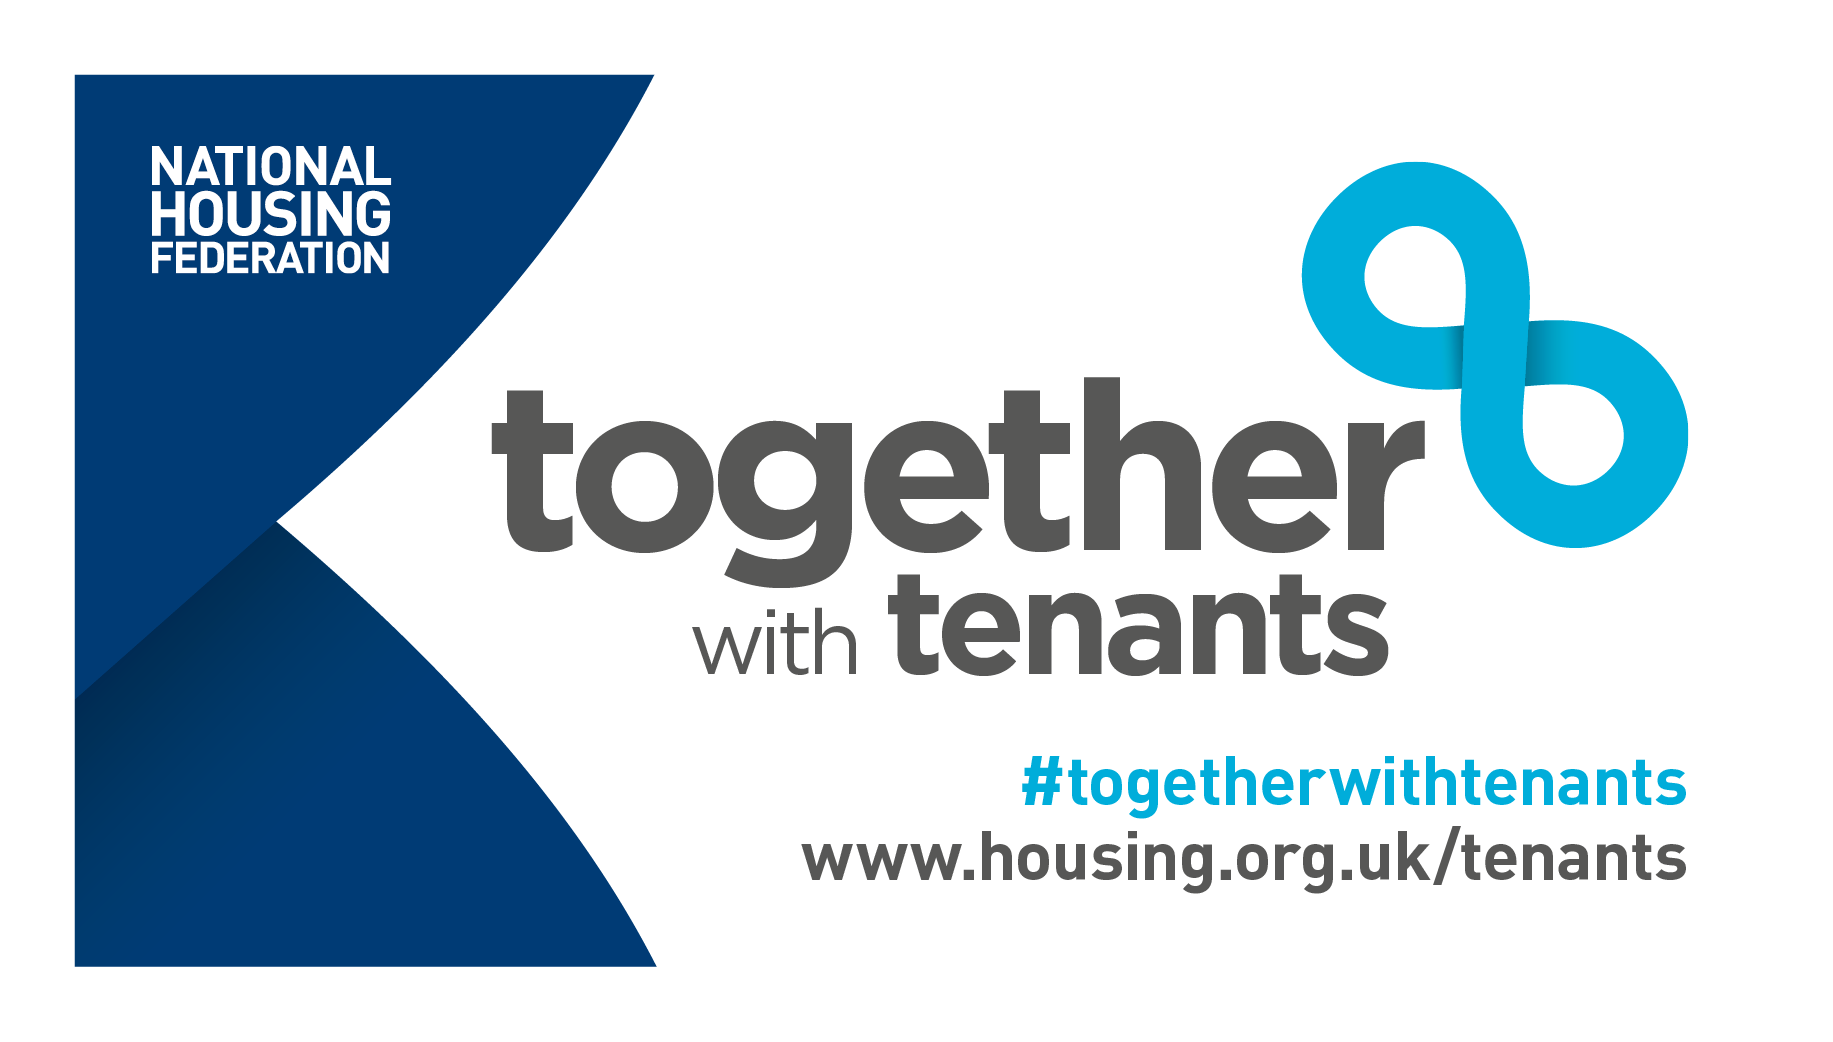 Together with tenants twitter graphic